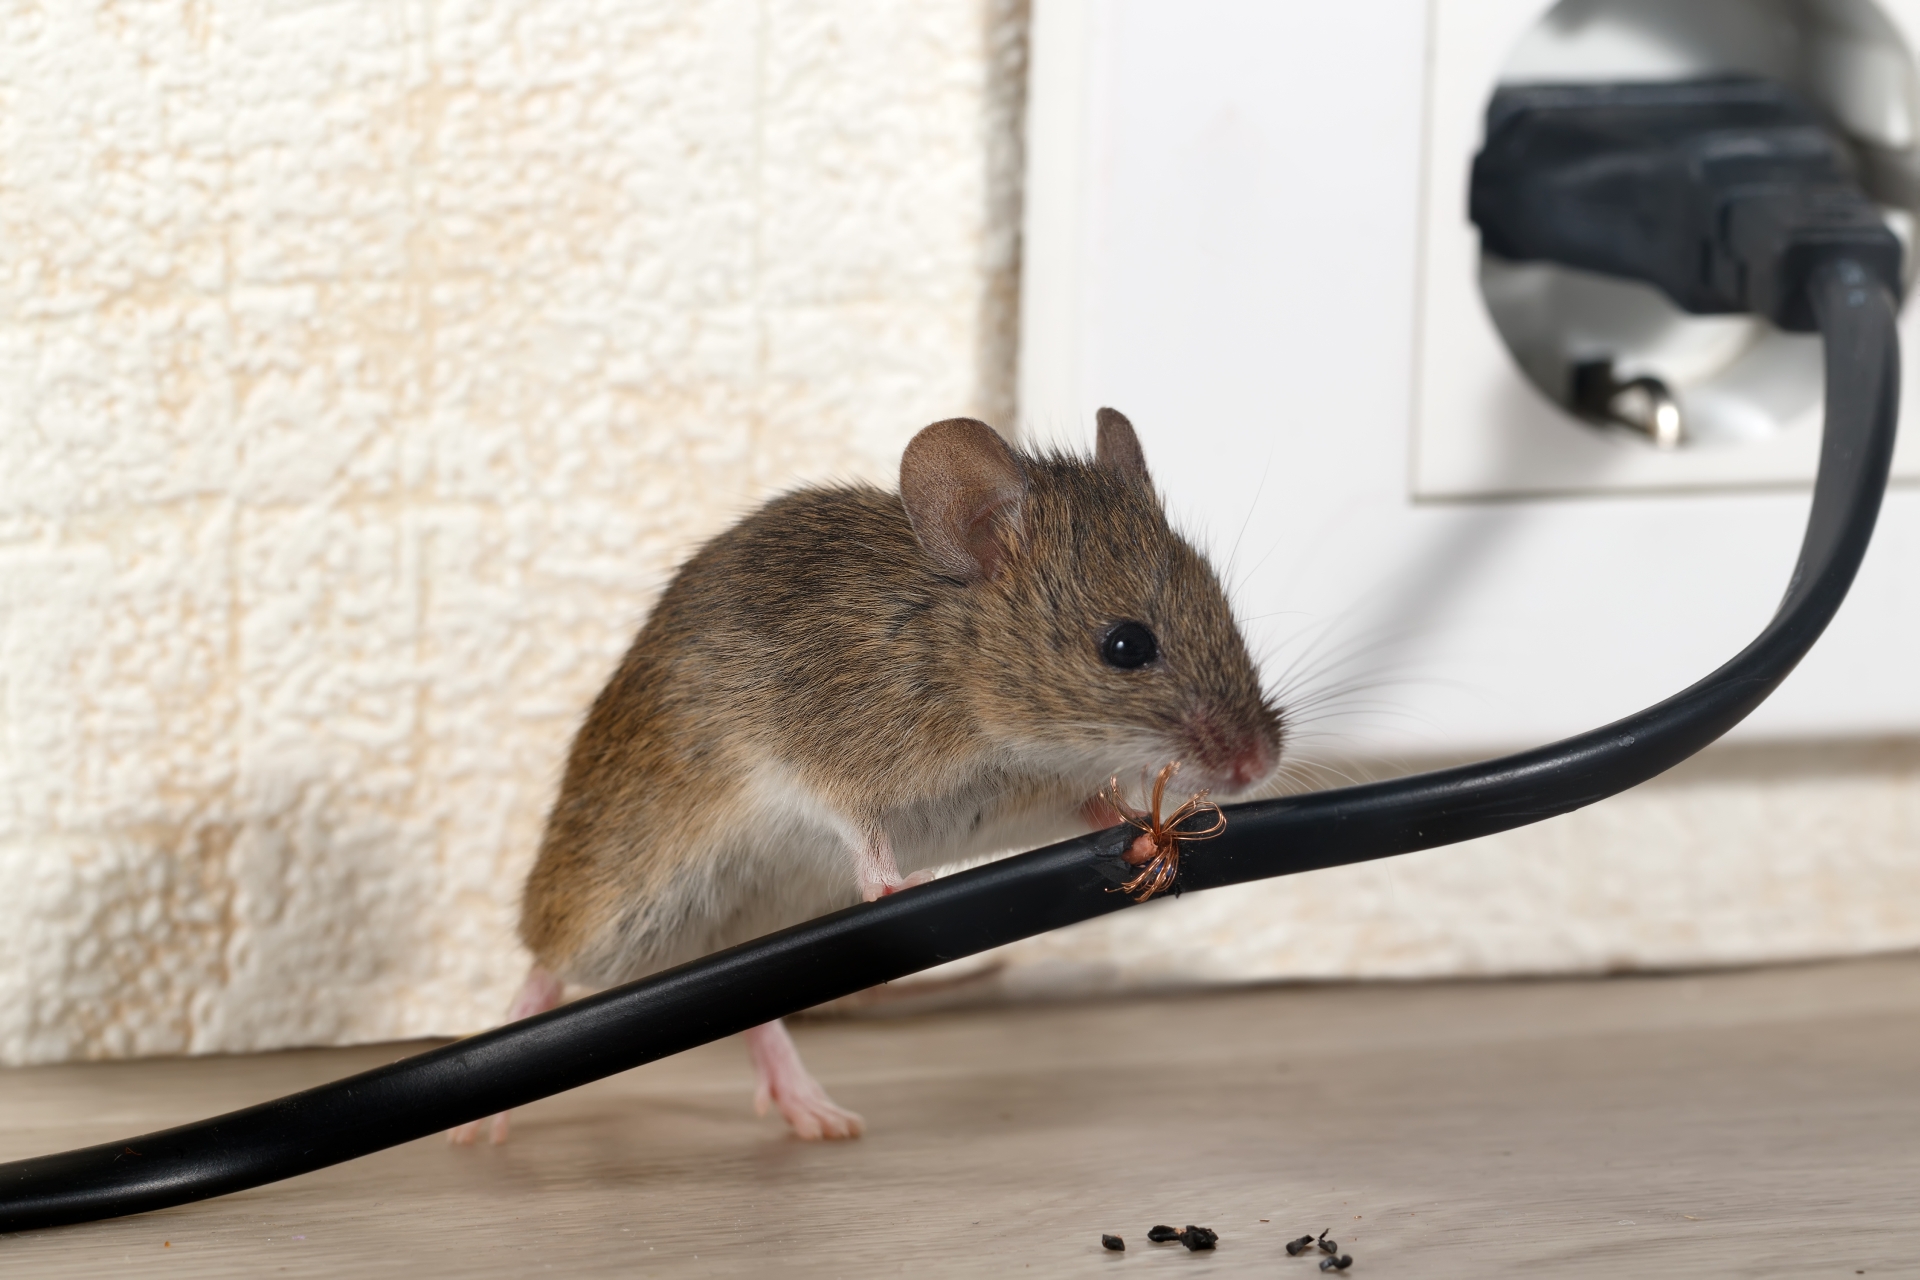 Mice Infestation, Pest Control in Woolwich, SE18. Call Now 020 8166 9746